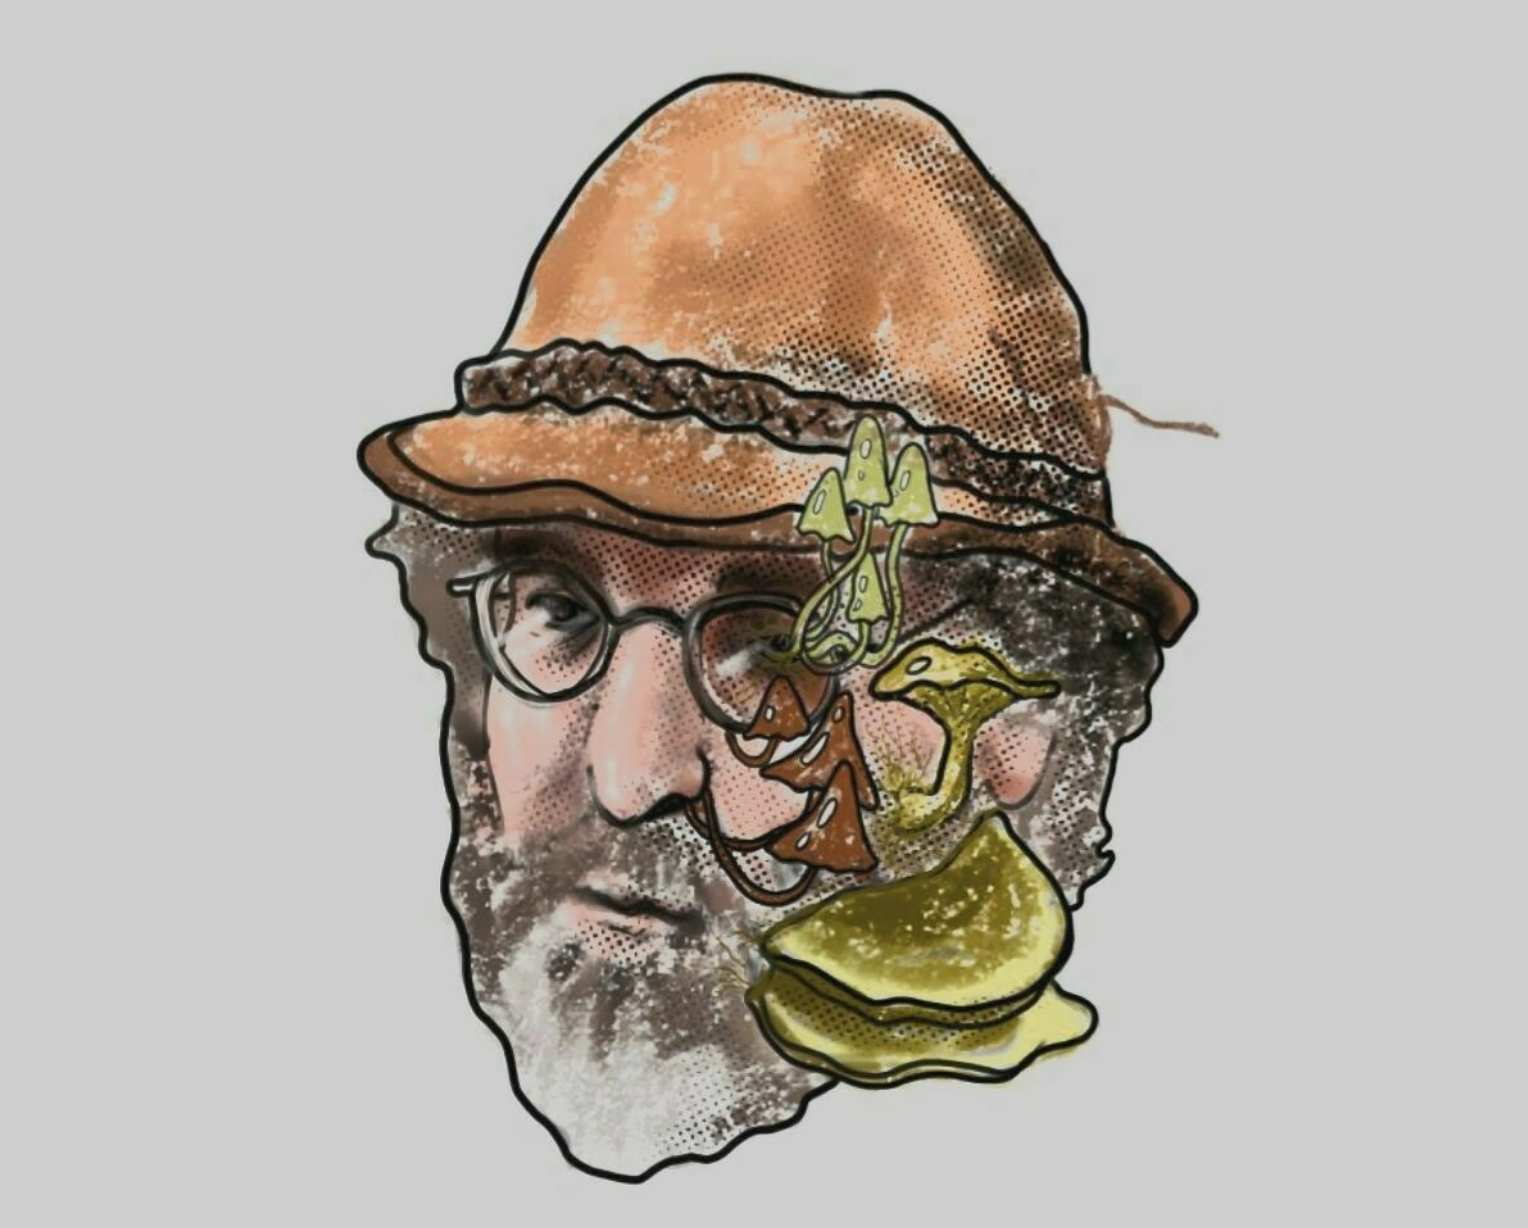 20 Inspiring Paul Stamets Quotes on Mushrooms and Their Potential to Revolutionize Health, Wellness, and the Environment